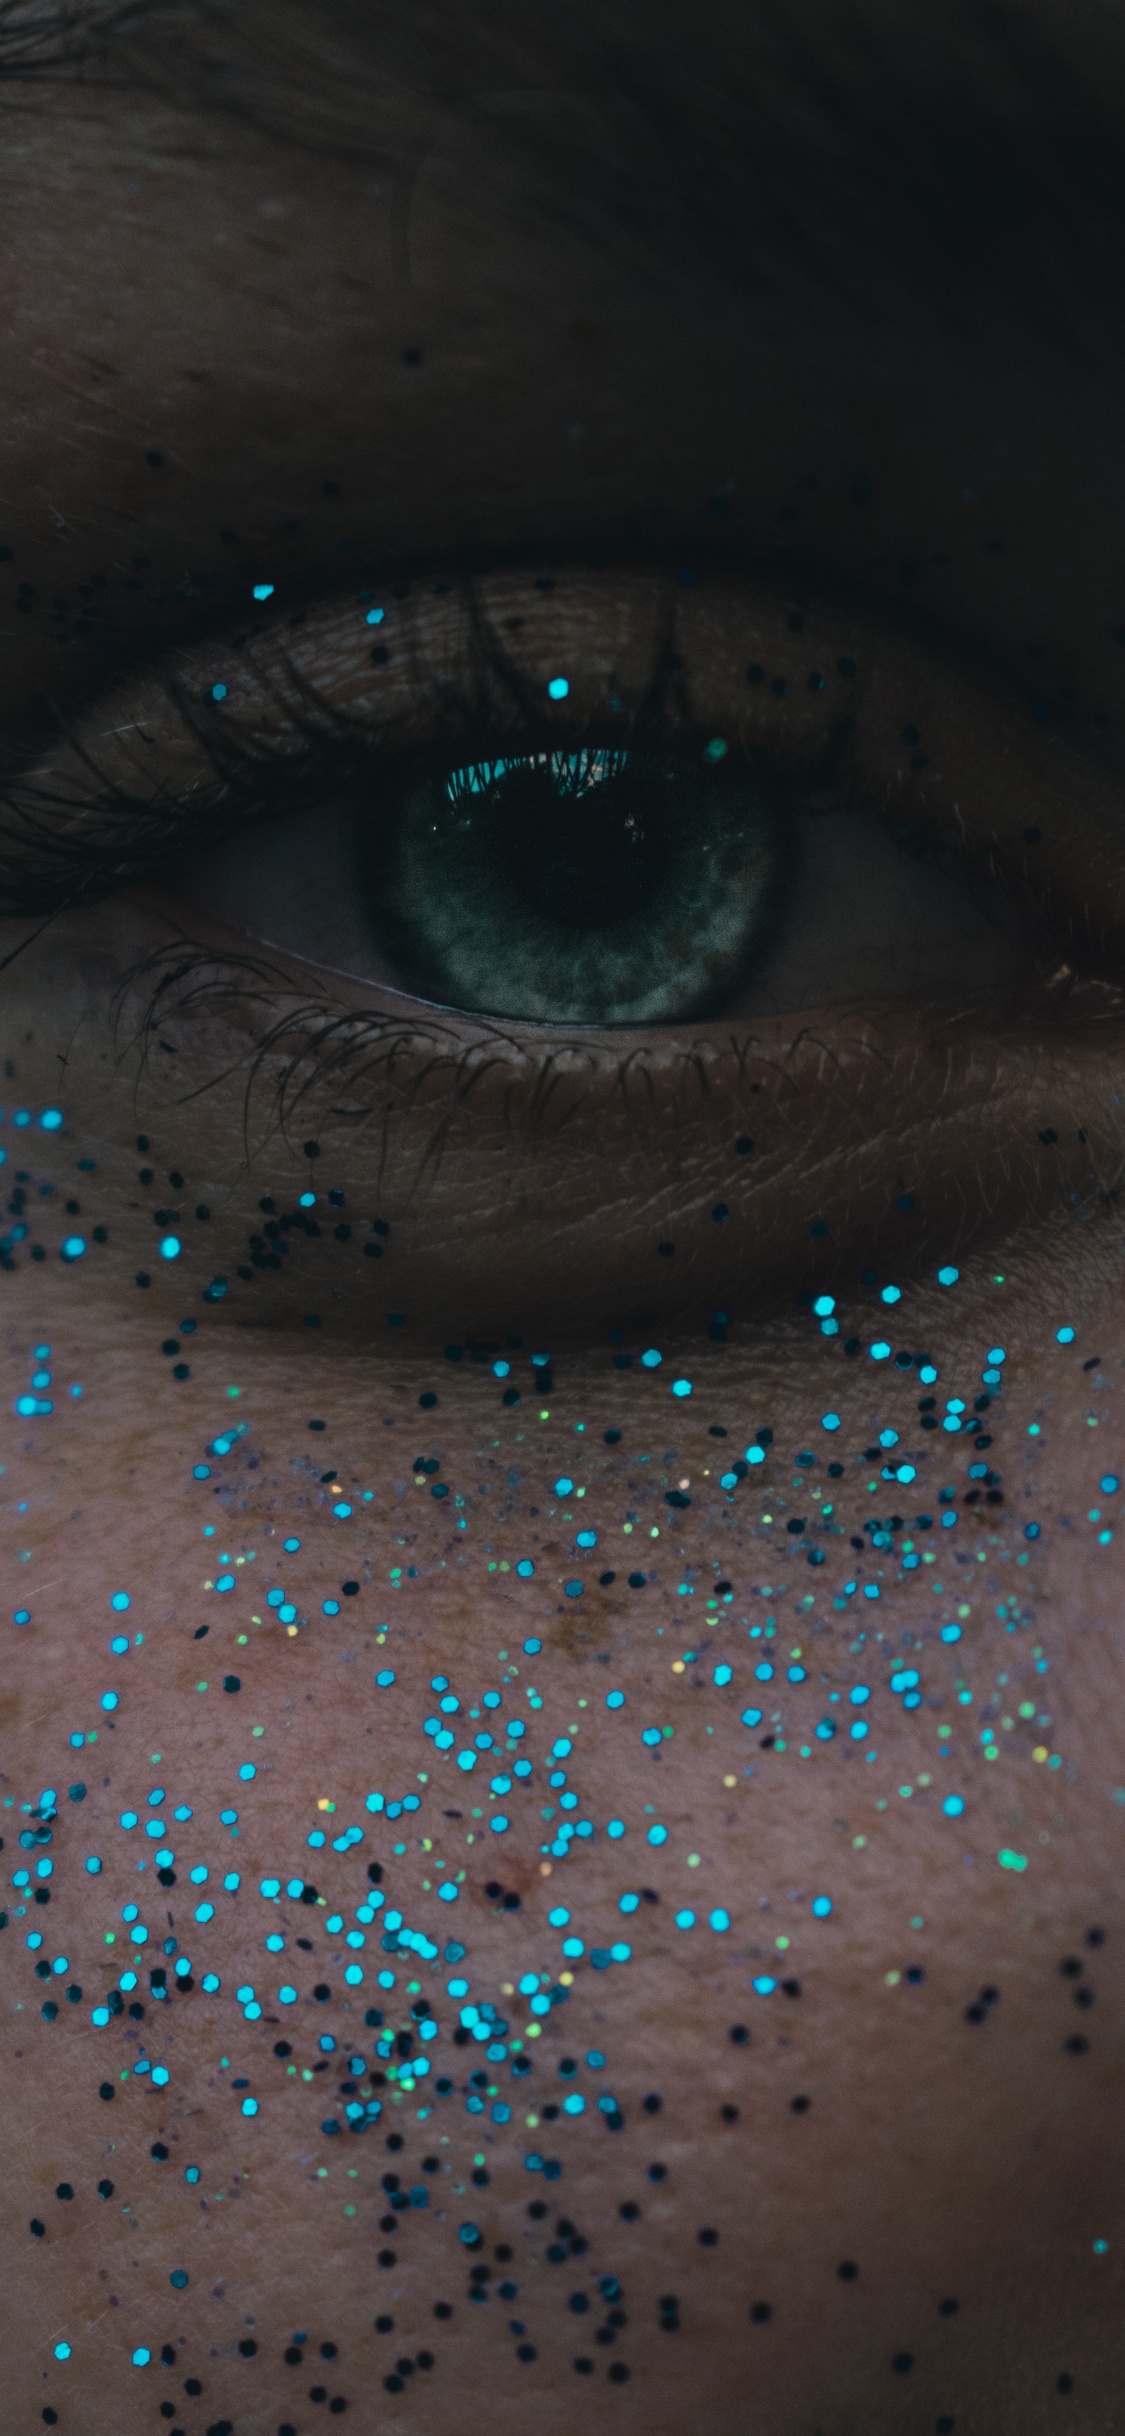 Persons Eye With Blue Eyes. Wallpaper in 1125x2436 Resolution